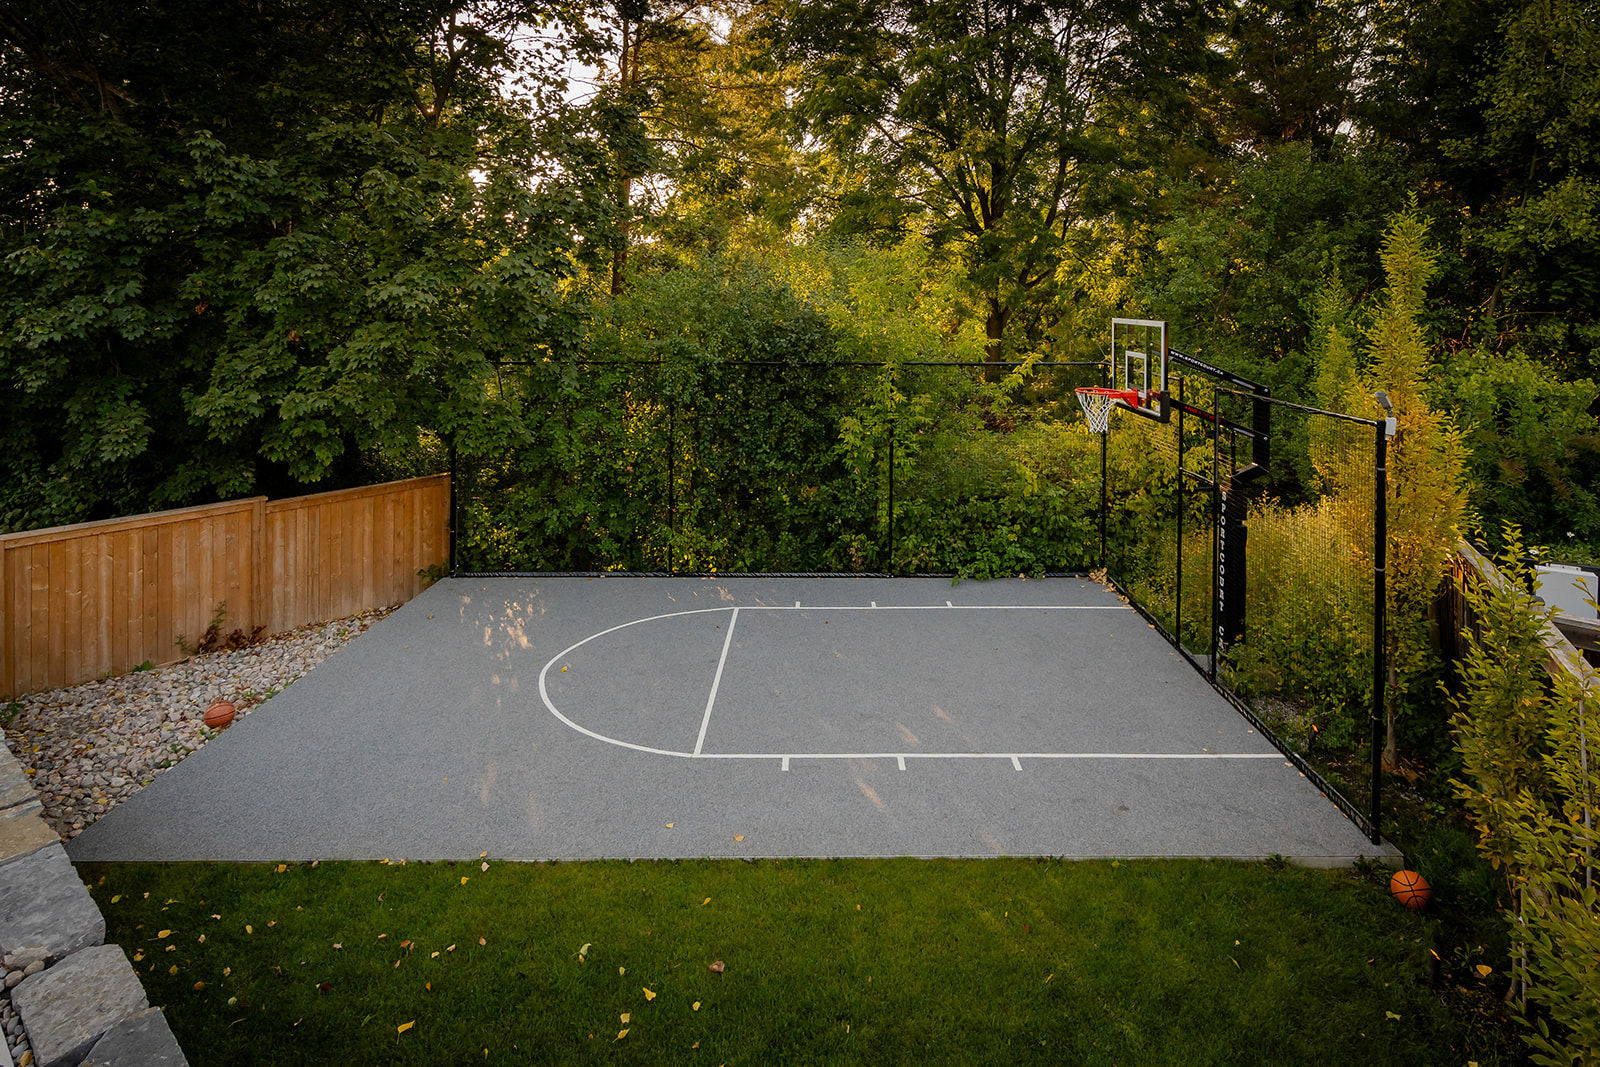 A practice basketball court with one net.